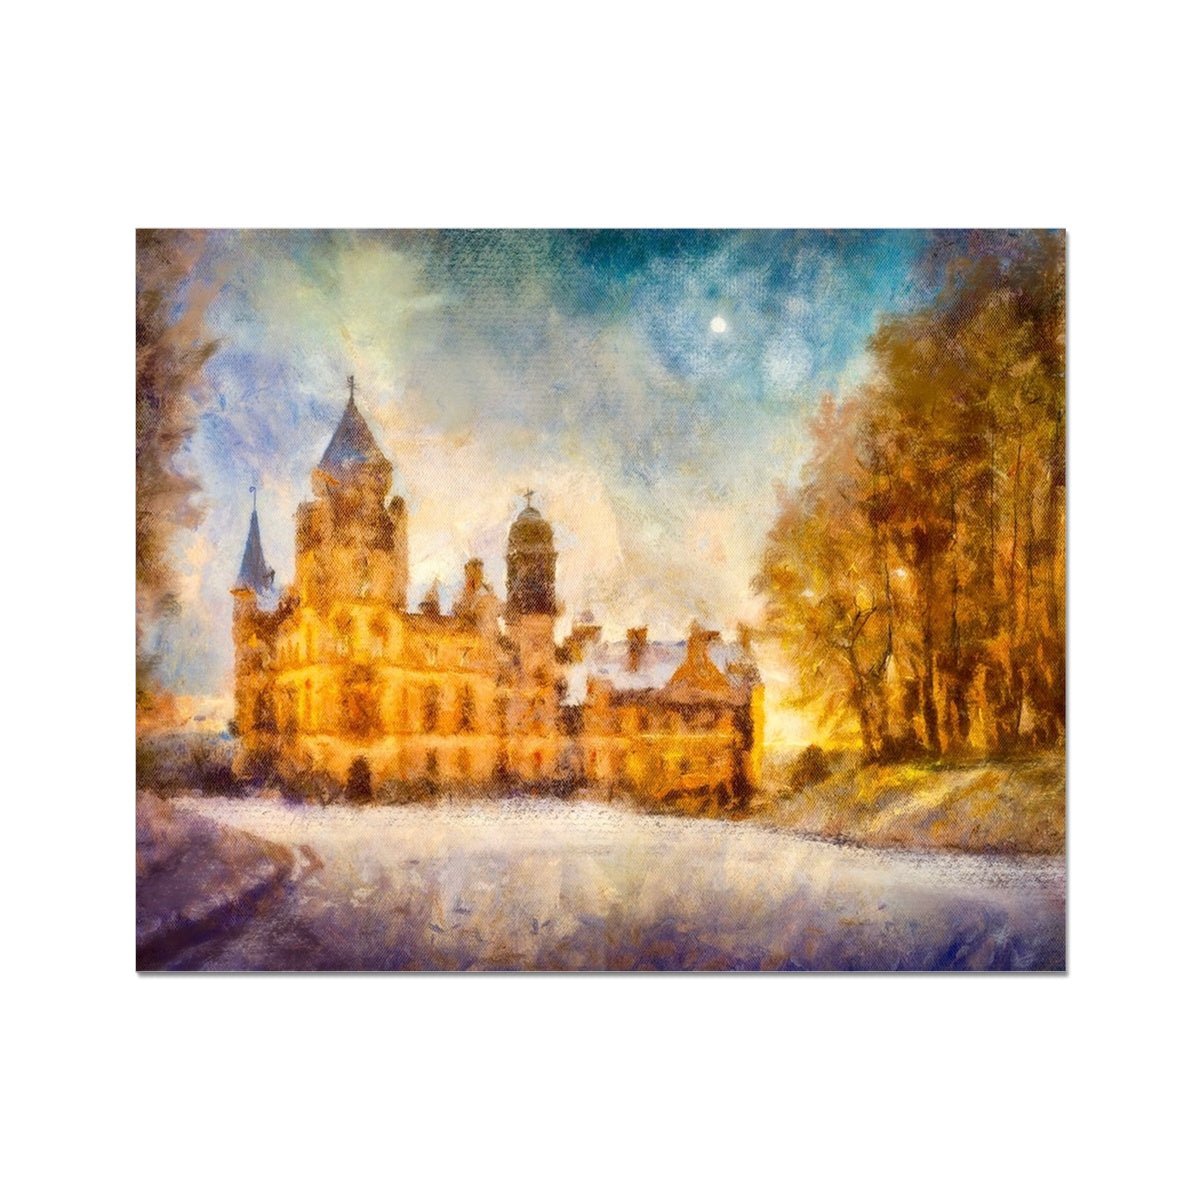 Dunrobin Castle Moonlight Painting | Artist Proof Collector Prints From Scotland-Artist Proof Collector Prints-Historic & Iconic Scotland Art Gallery-20"x16"-Paintings, Prints, Homeware, Art Gifts From Scotland By Scottish Artist Kevin Hunter